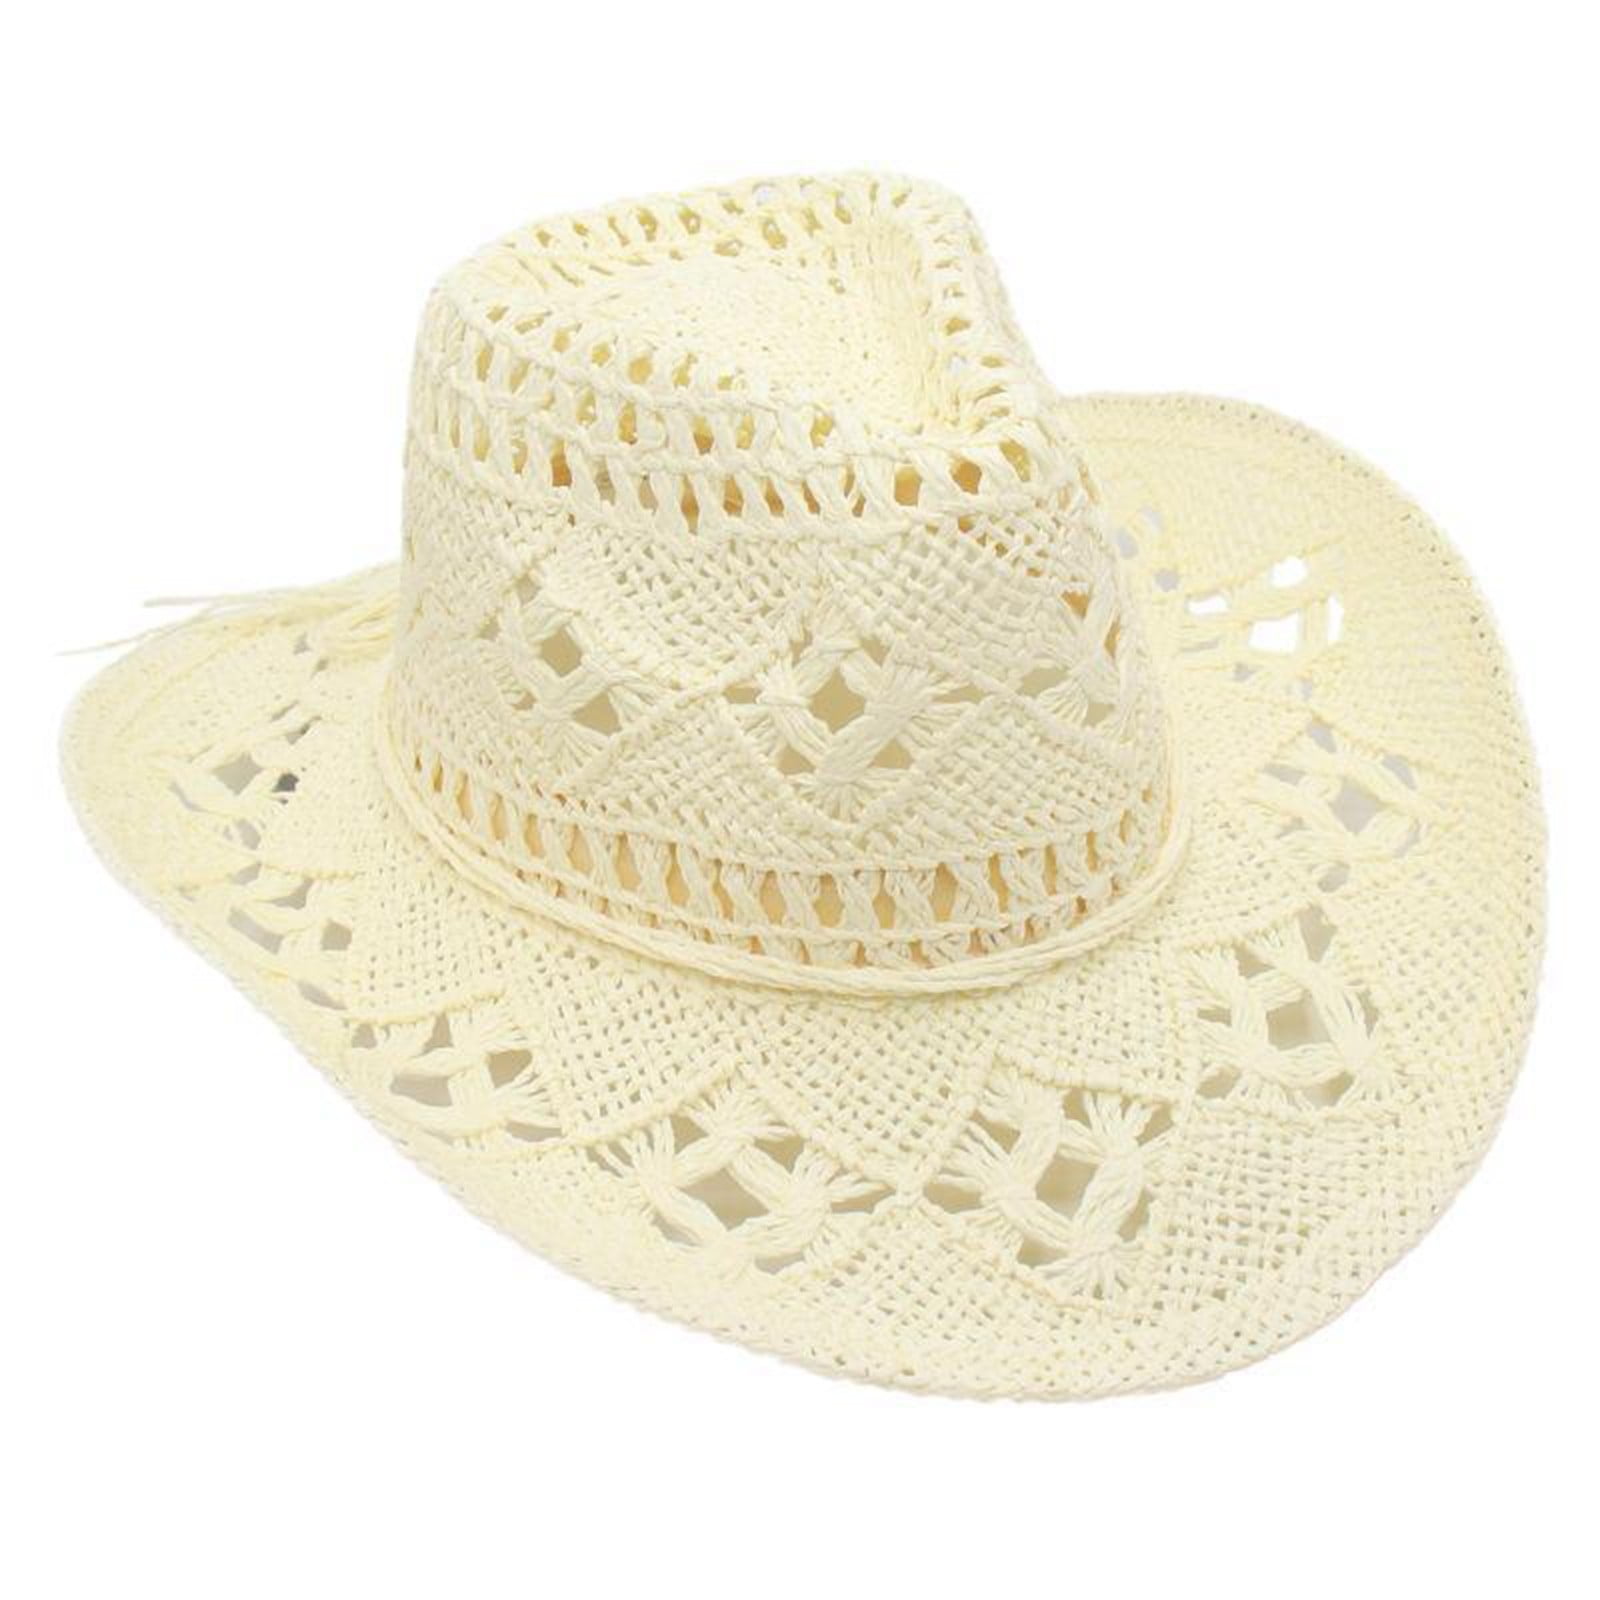 Ehtmsak Straw Cowboy Hat for Women Wide-brimmed Western Cowboy Cowgirl Multi-functional Sun Hat for Summer White Free size, adult Unisex, Size: One